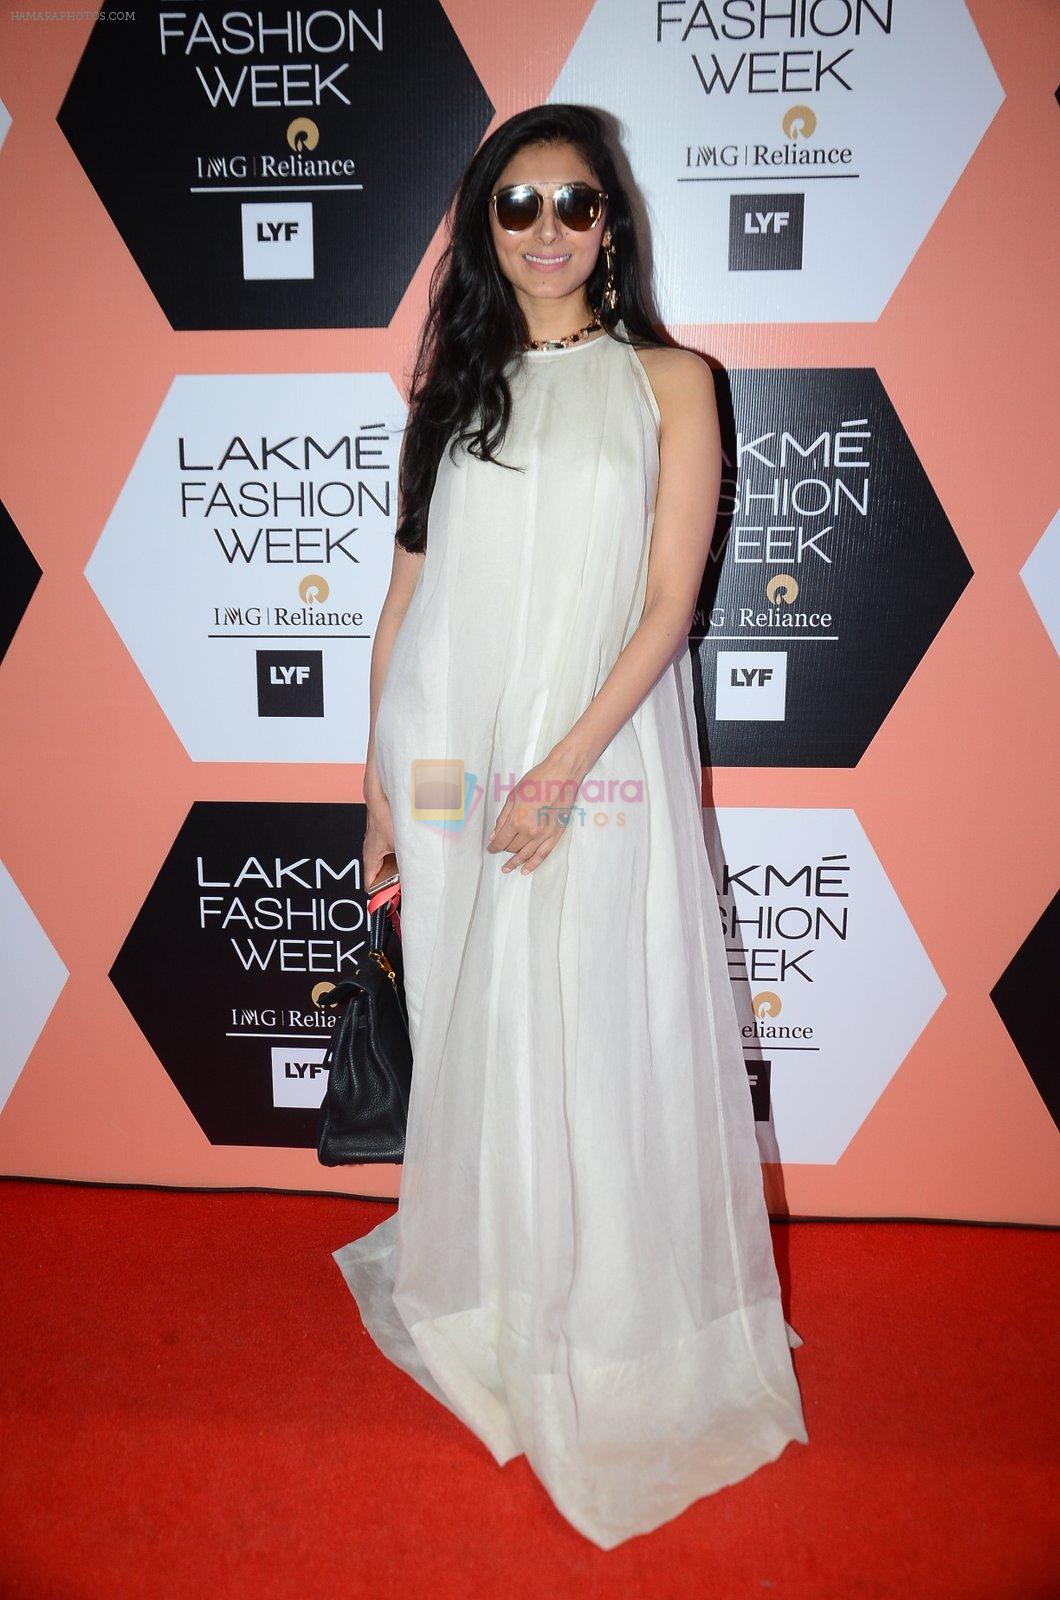 Perina Qureshi on Day 4 at Lakme Fashion Week 2016 on 2nd April 2016